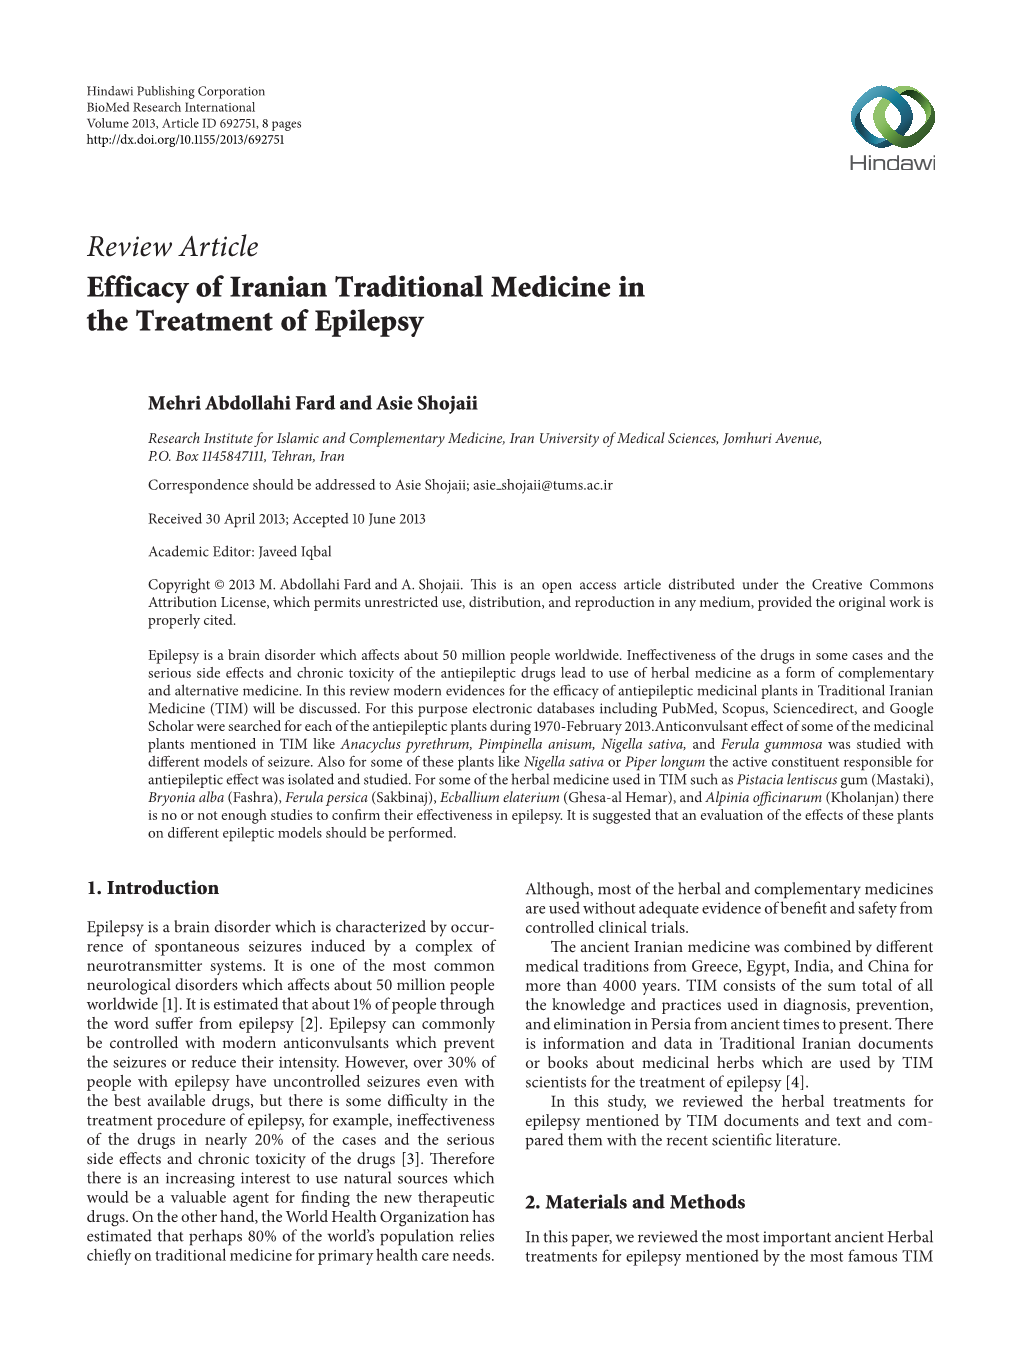 Efficacy of Iranian Traditional Medicine in the Treatment of Epilepsy